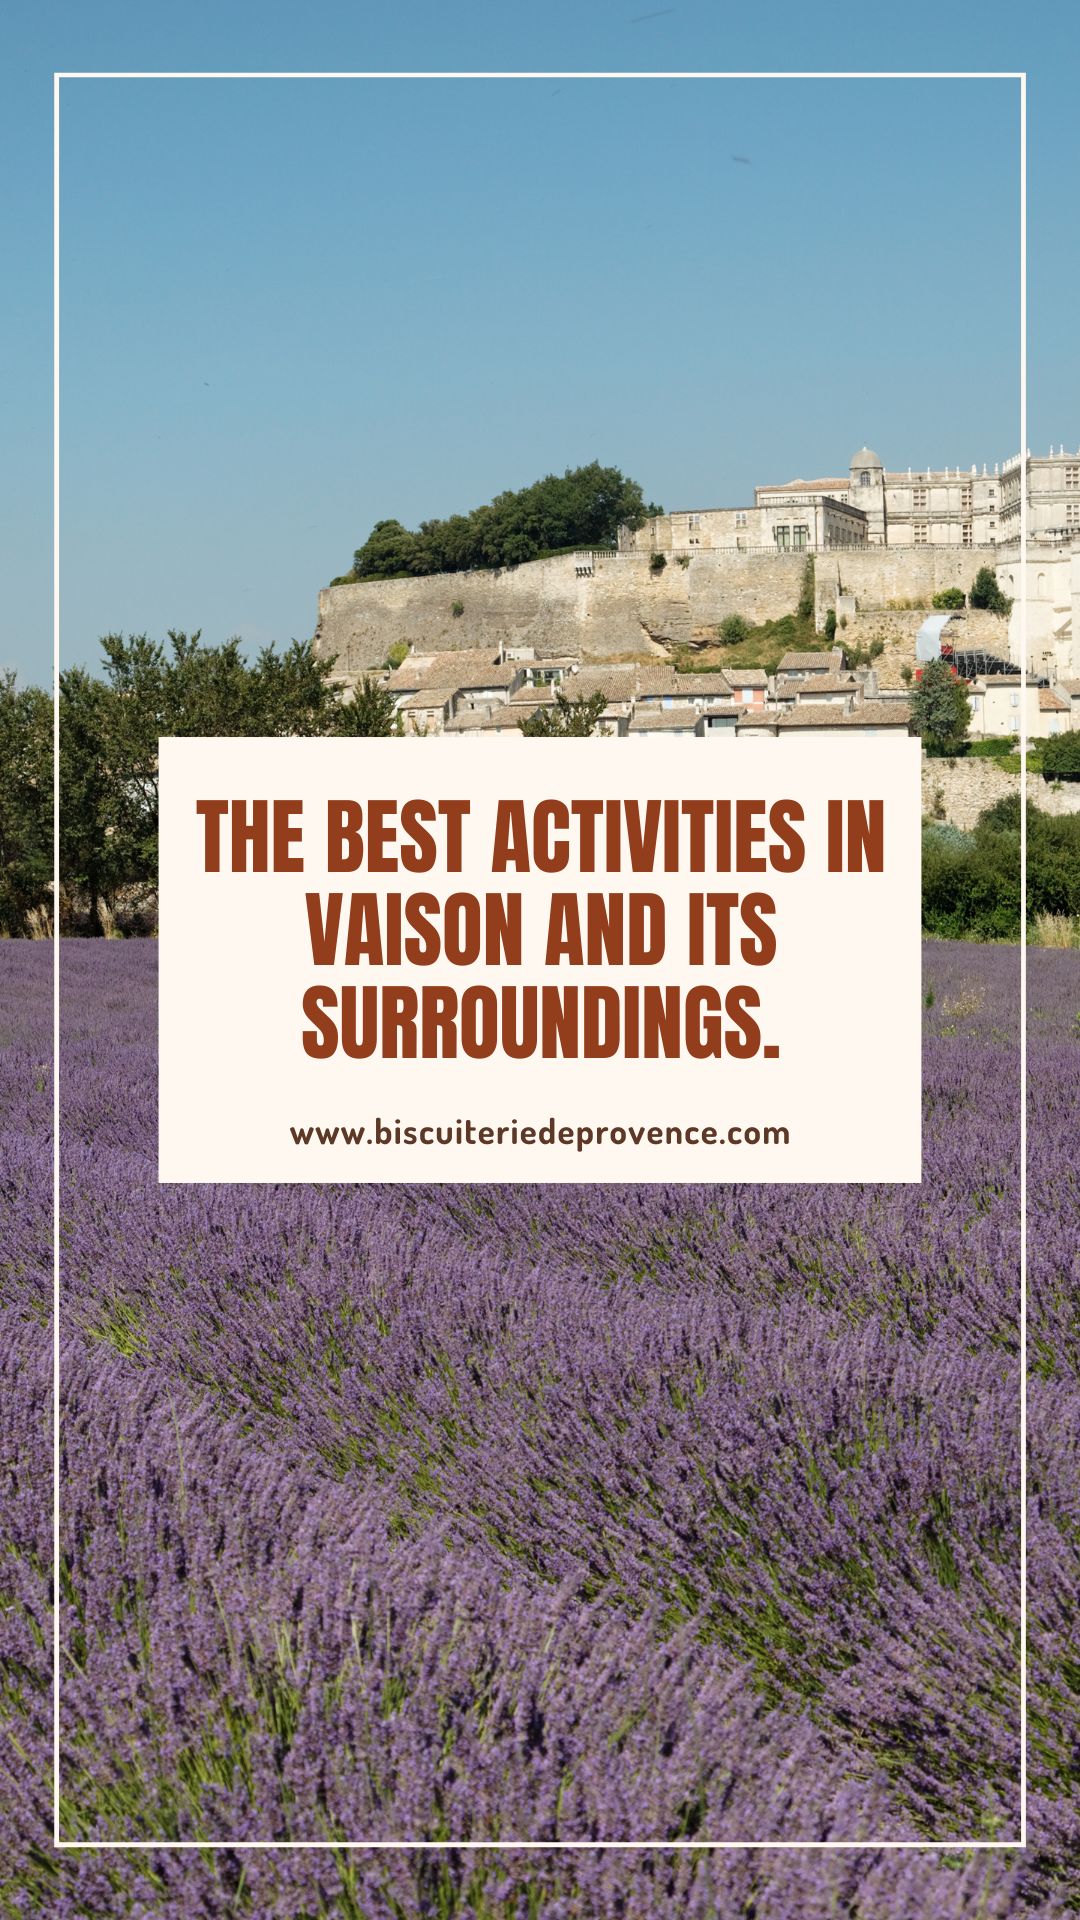 The best activities in vaison and its surrondings 